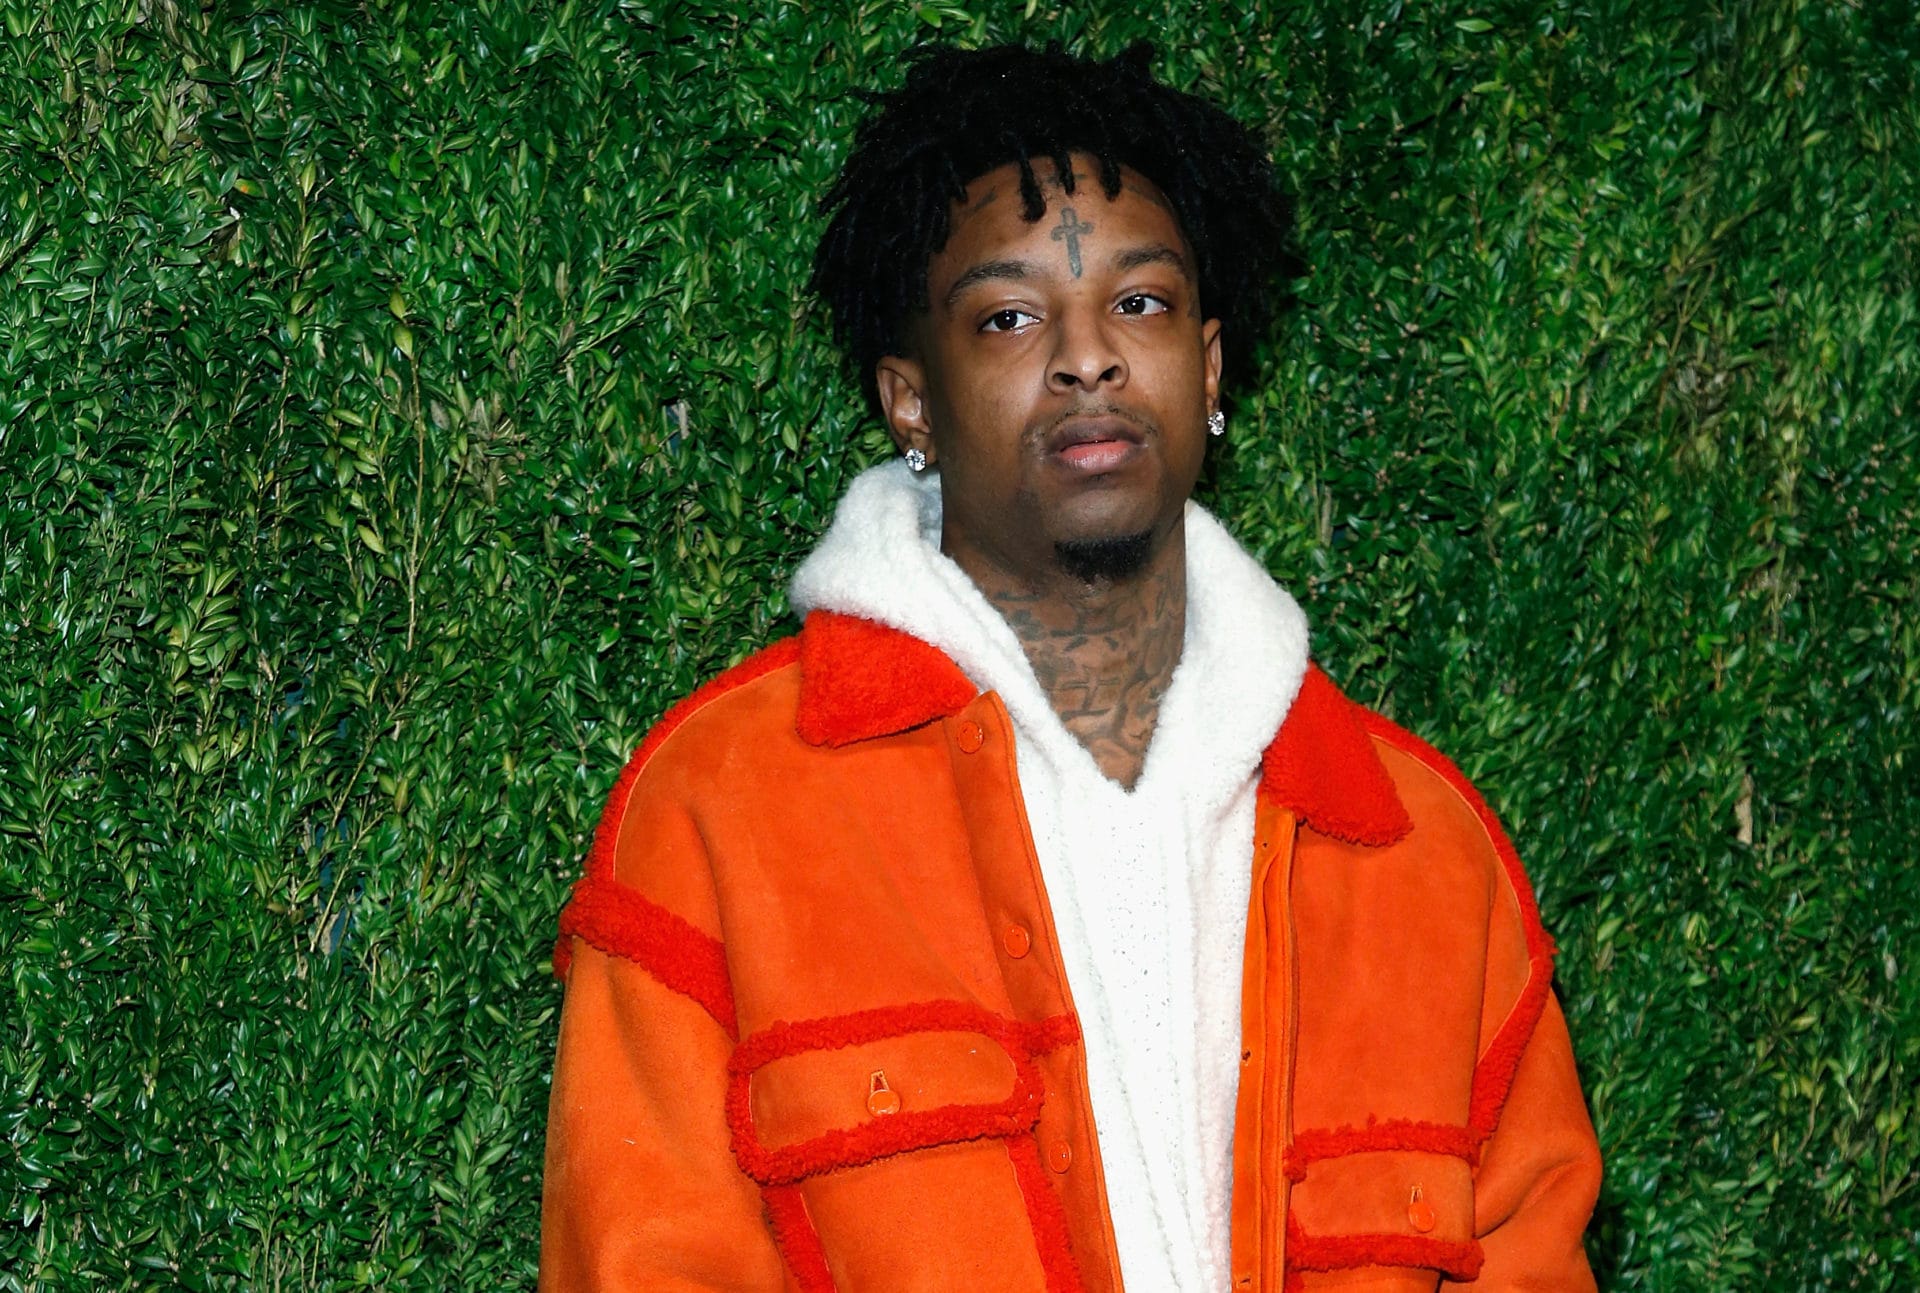 21 Savage Says He Was 'Definitely Targeted' By ICE In First Interview Since Arrest